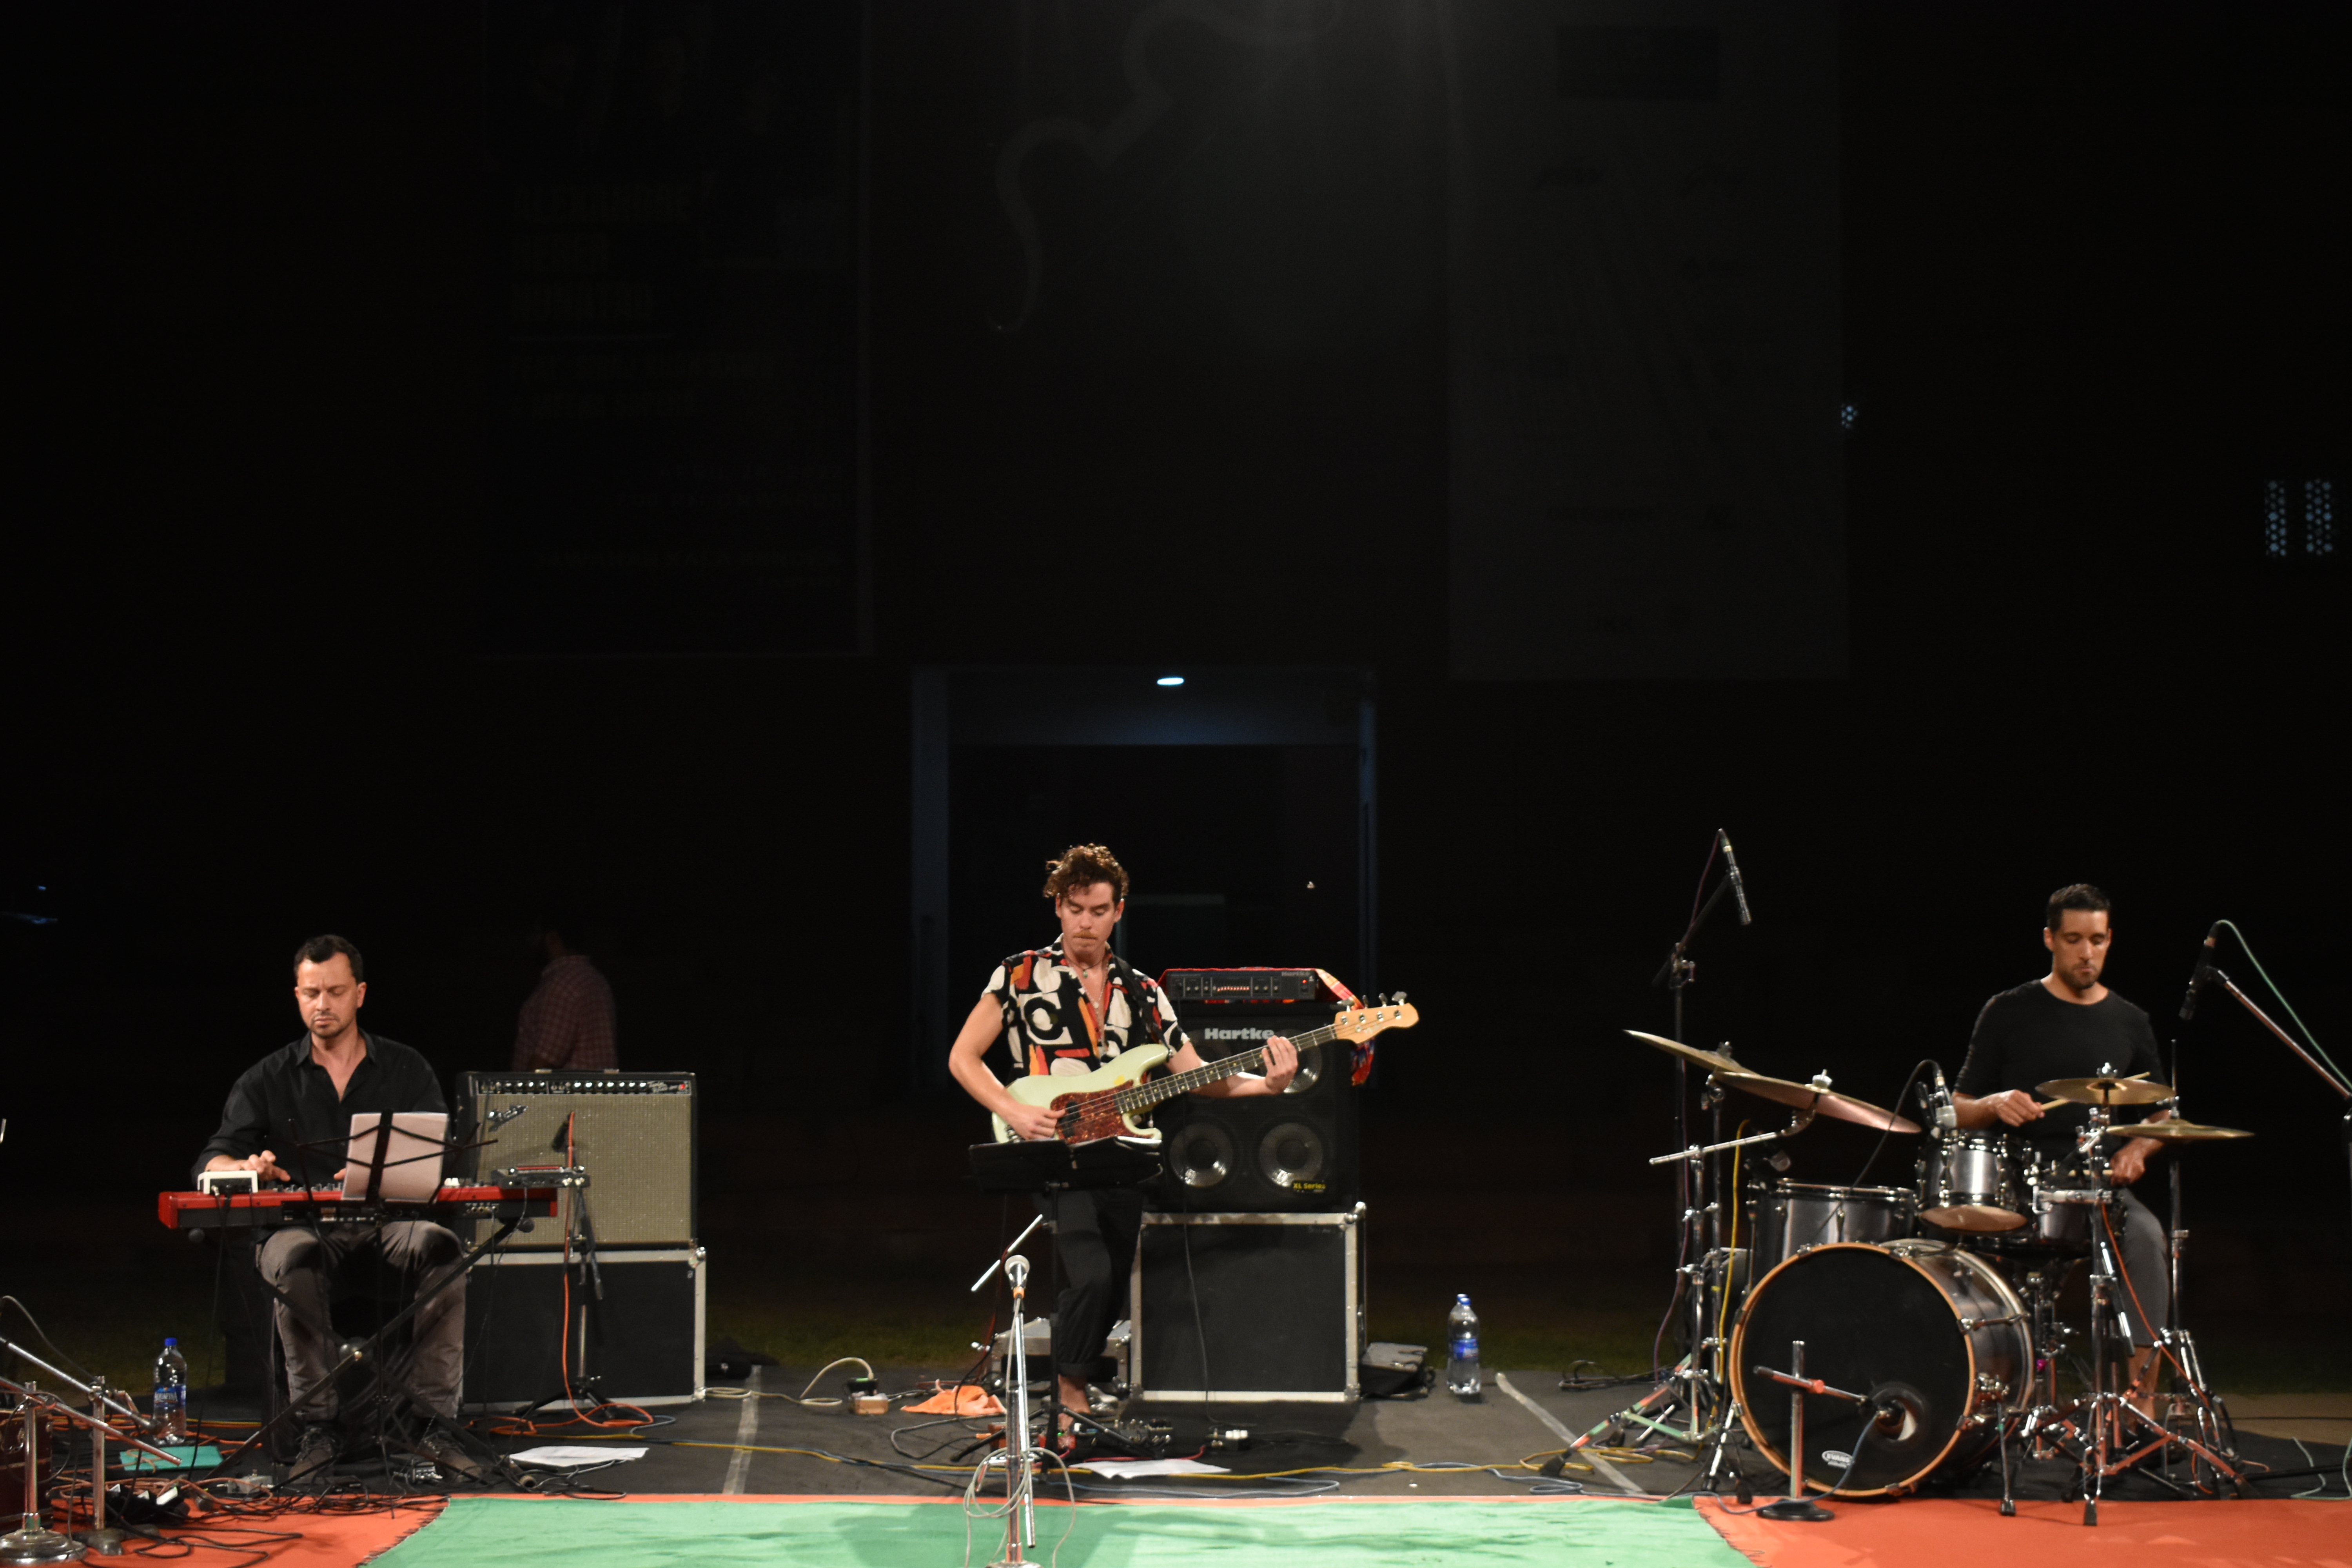 JAZZ TRIO NUNATAQ COOLS JAIPUR WITH JIVES INSPIRED BY THE VAST ICED STRETCHES OF LANDS AT JKK